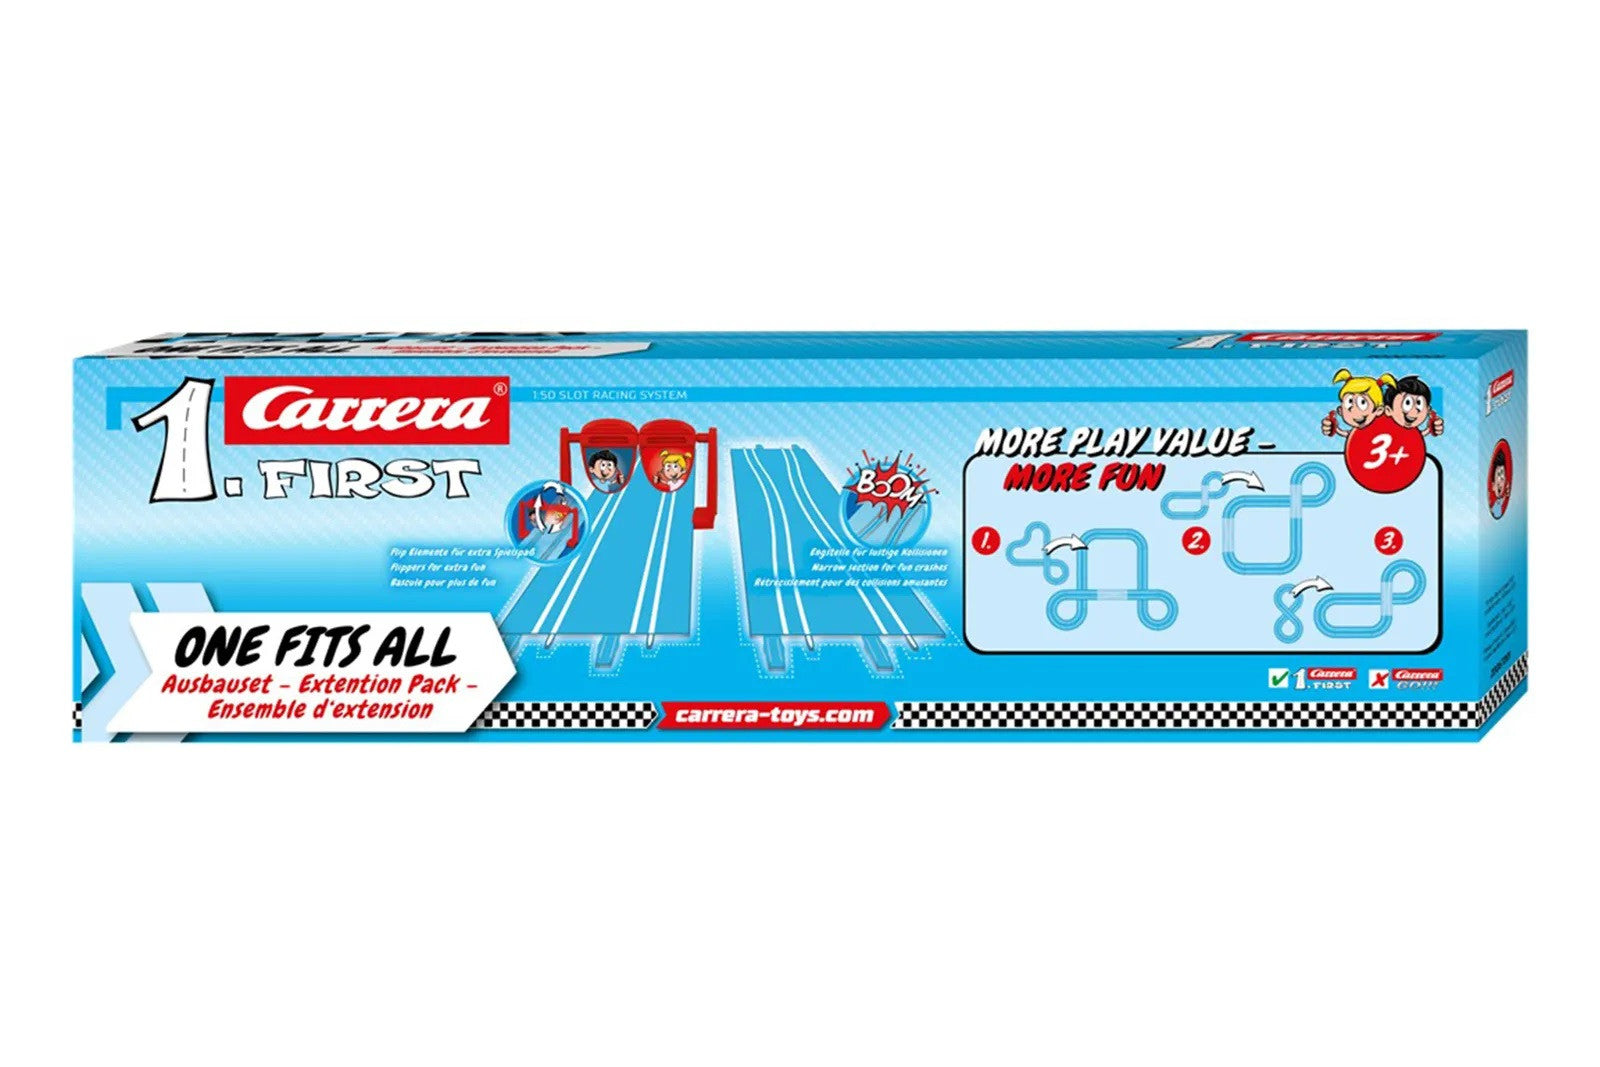 Carrera First Expansion Pack "One Fits All" 67001